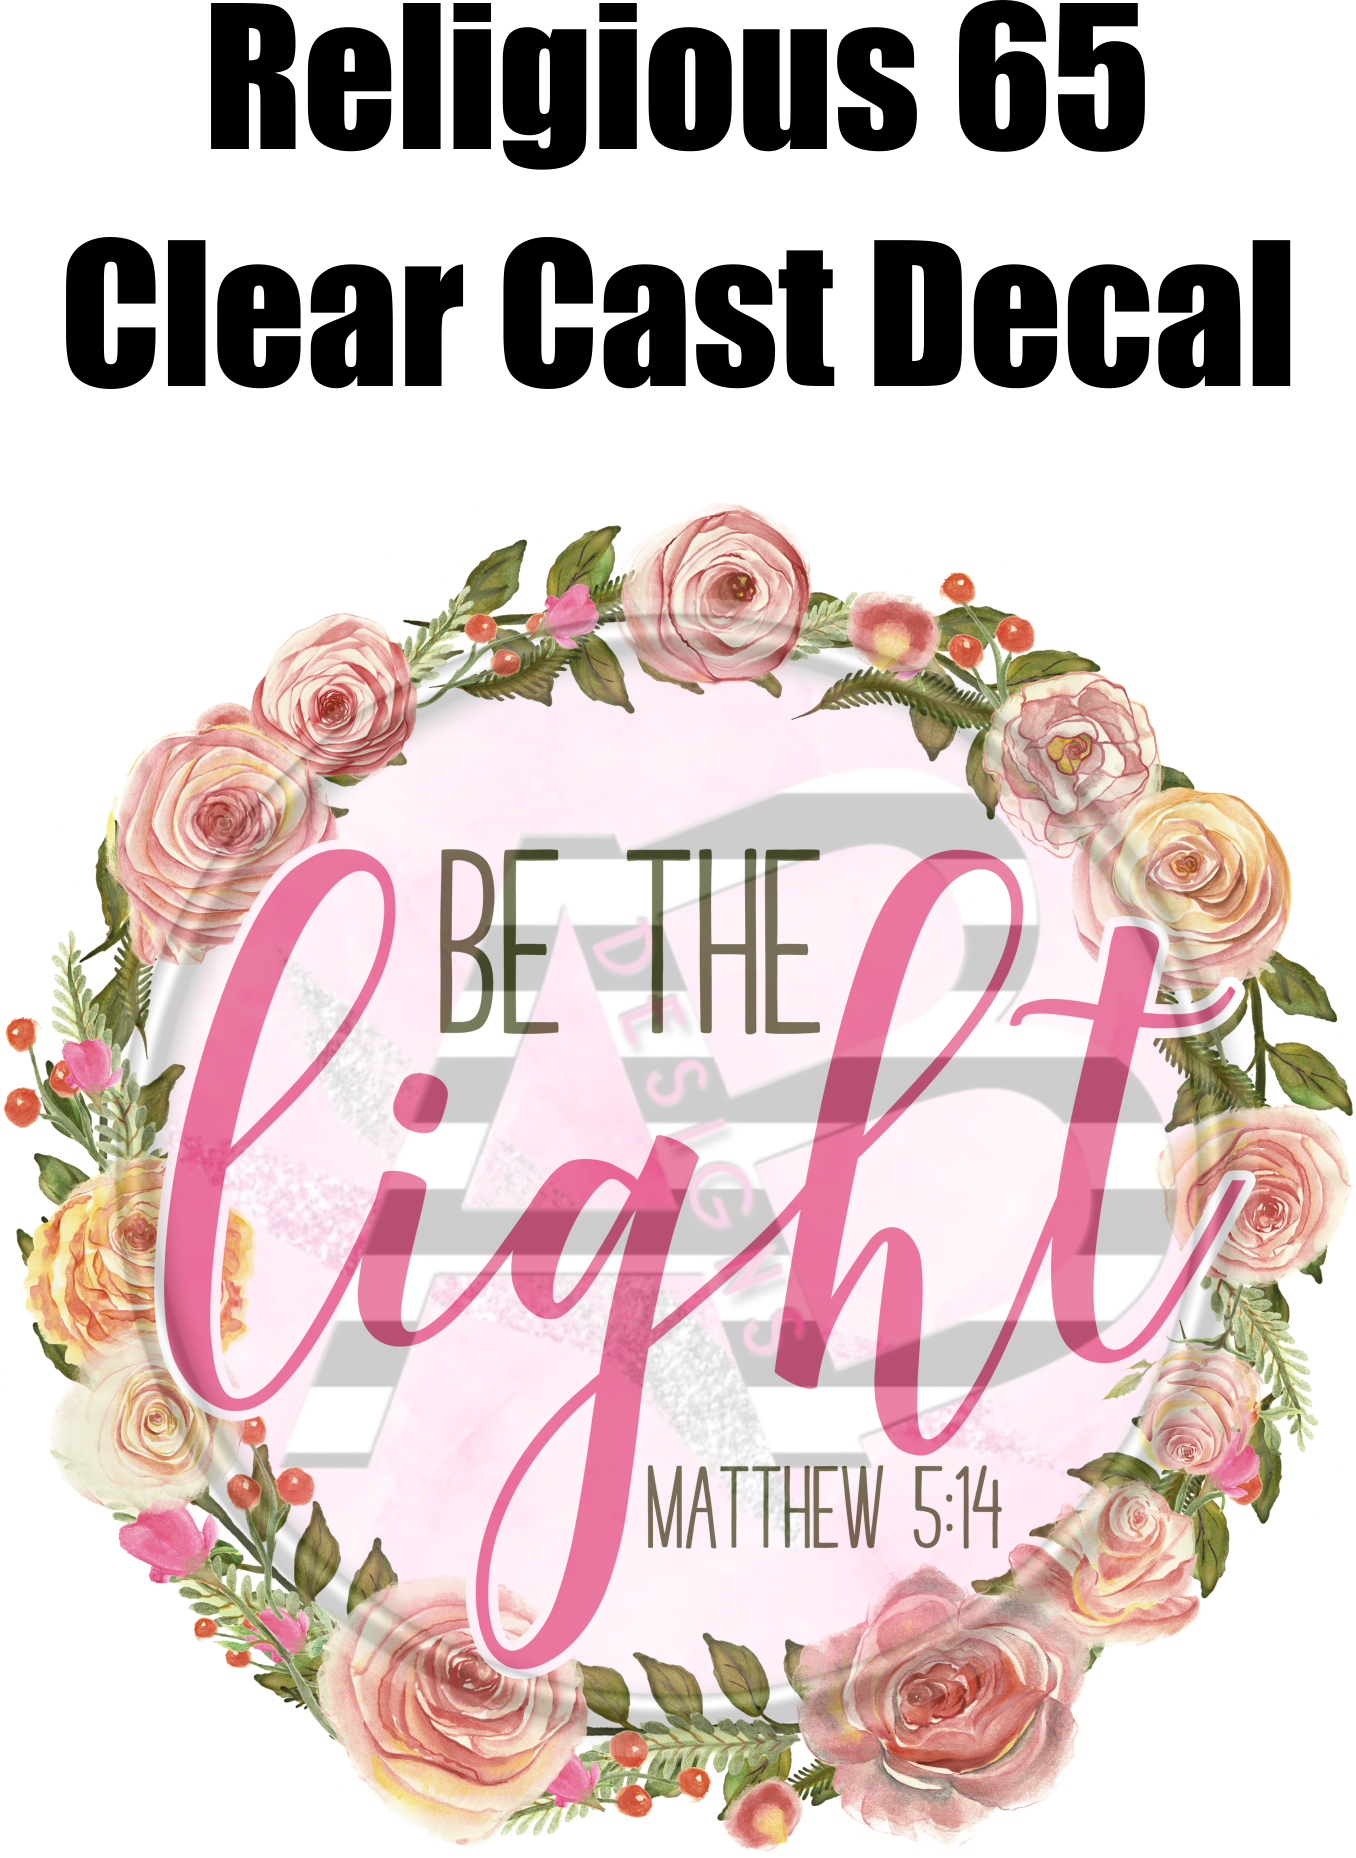 Religious 65 - Clear Cast Decal - 73